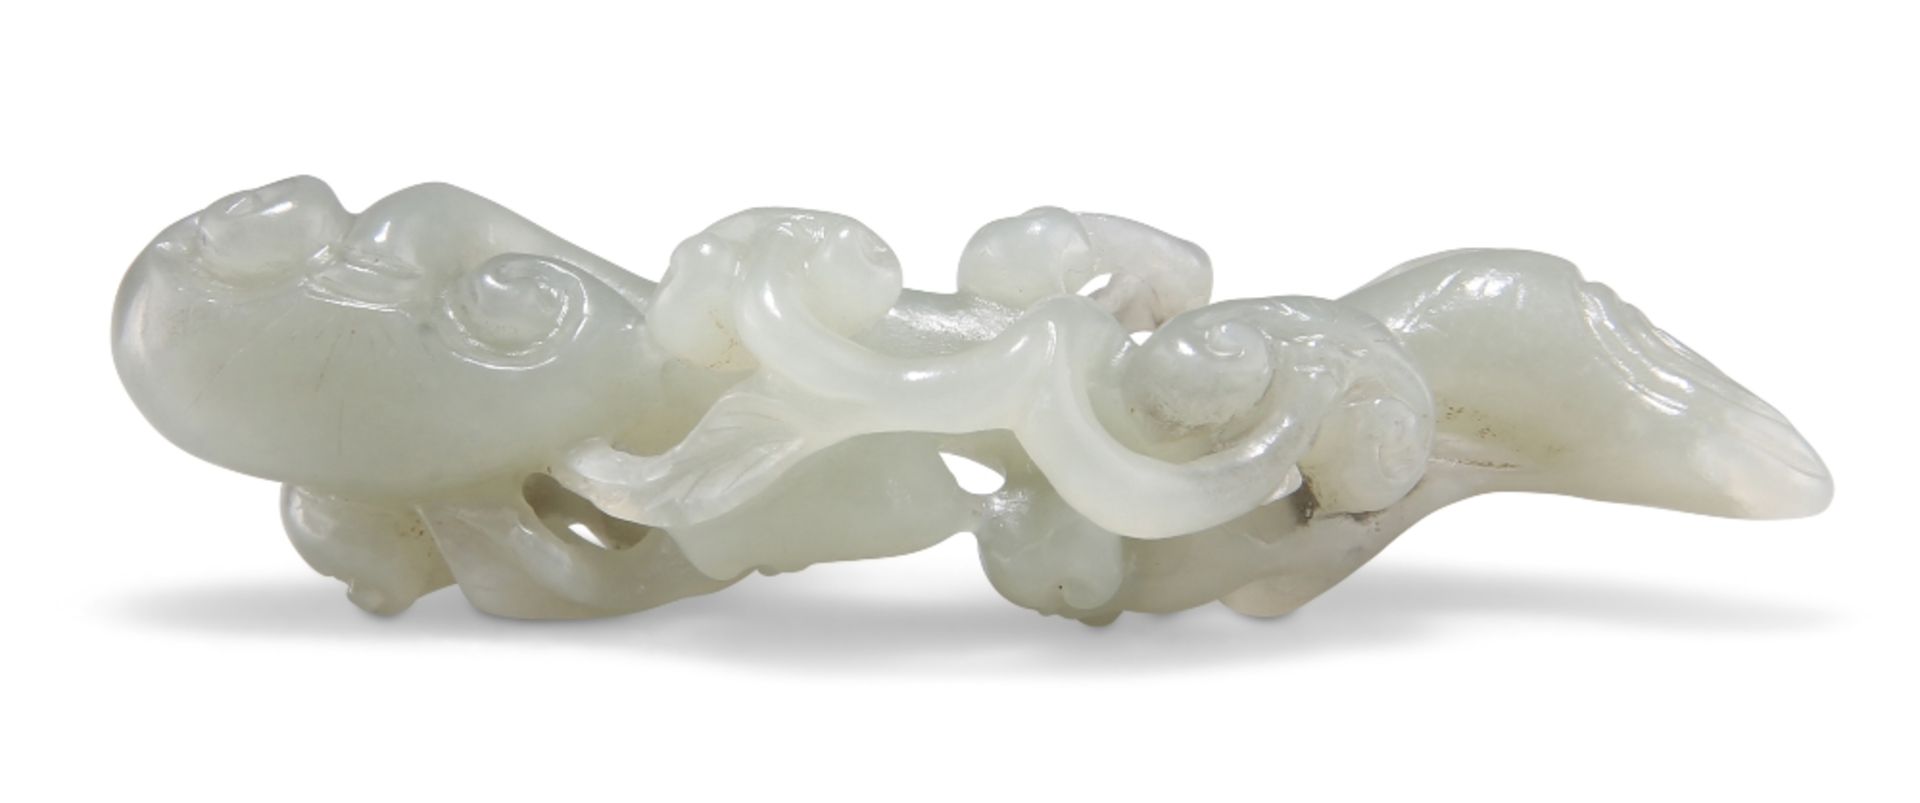 A CHINESE JADE CARVING OF SCROLLING LINGZHI FUNGUS